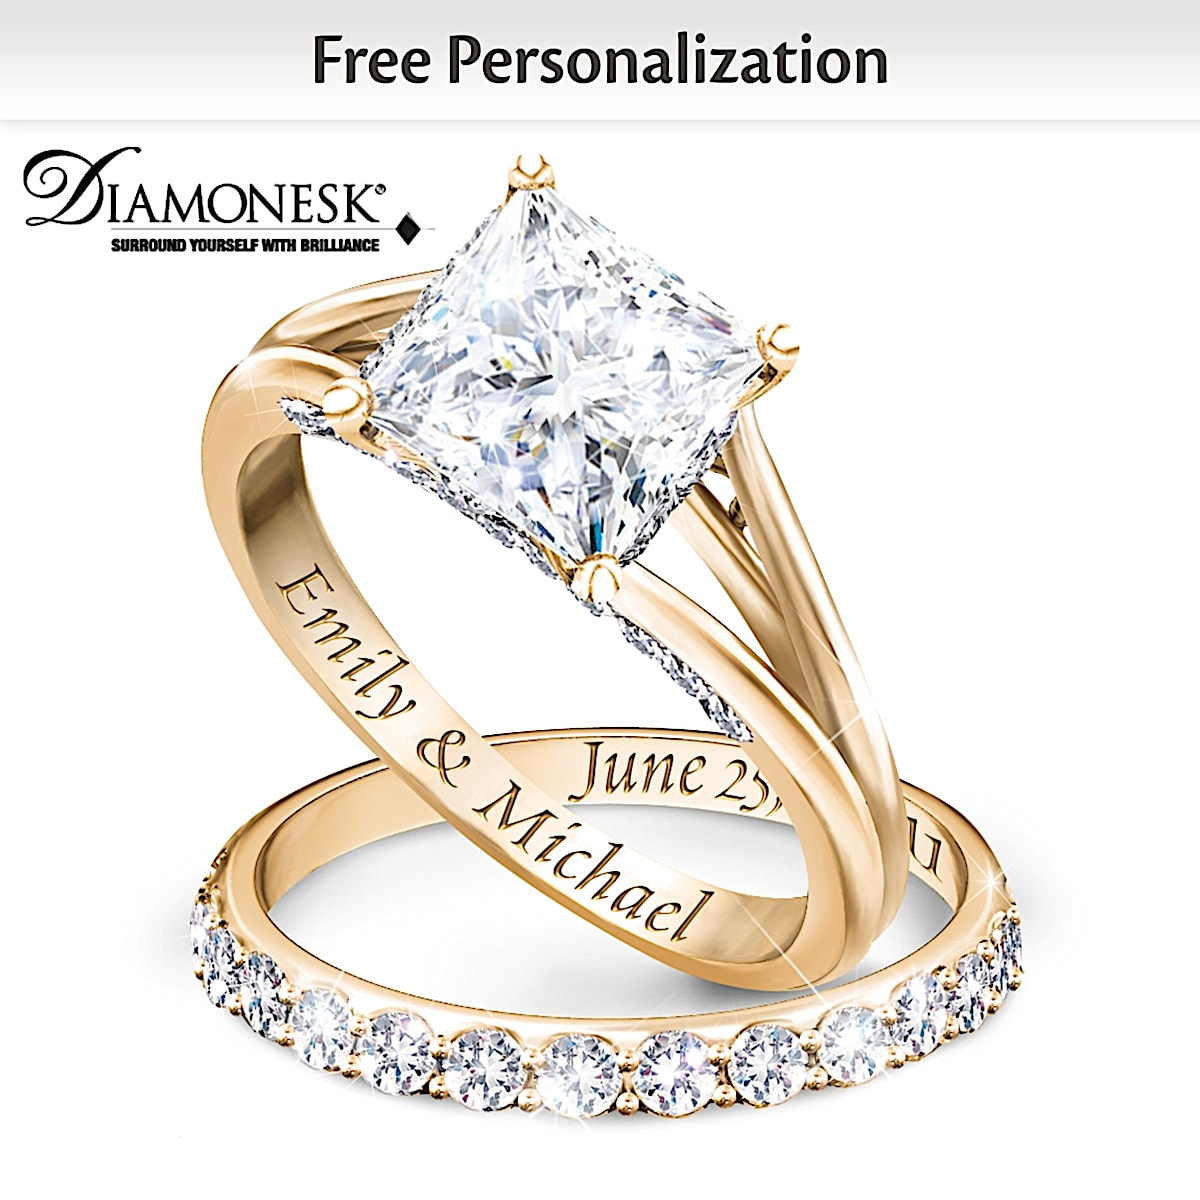 How to Personalize an Engagement Ring | Kimberfire